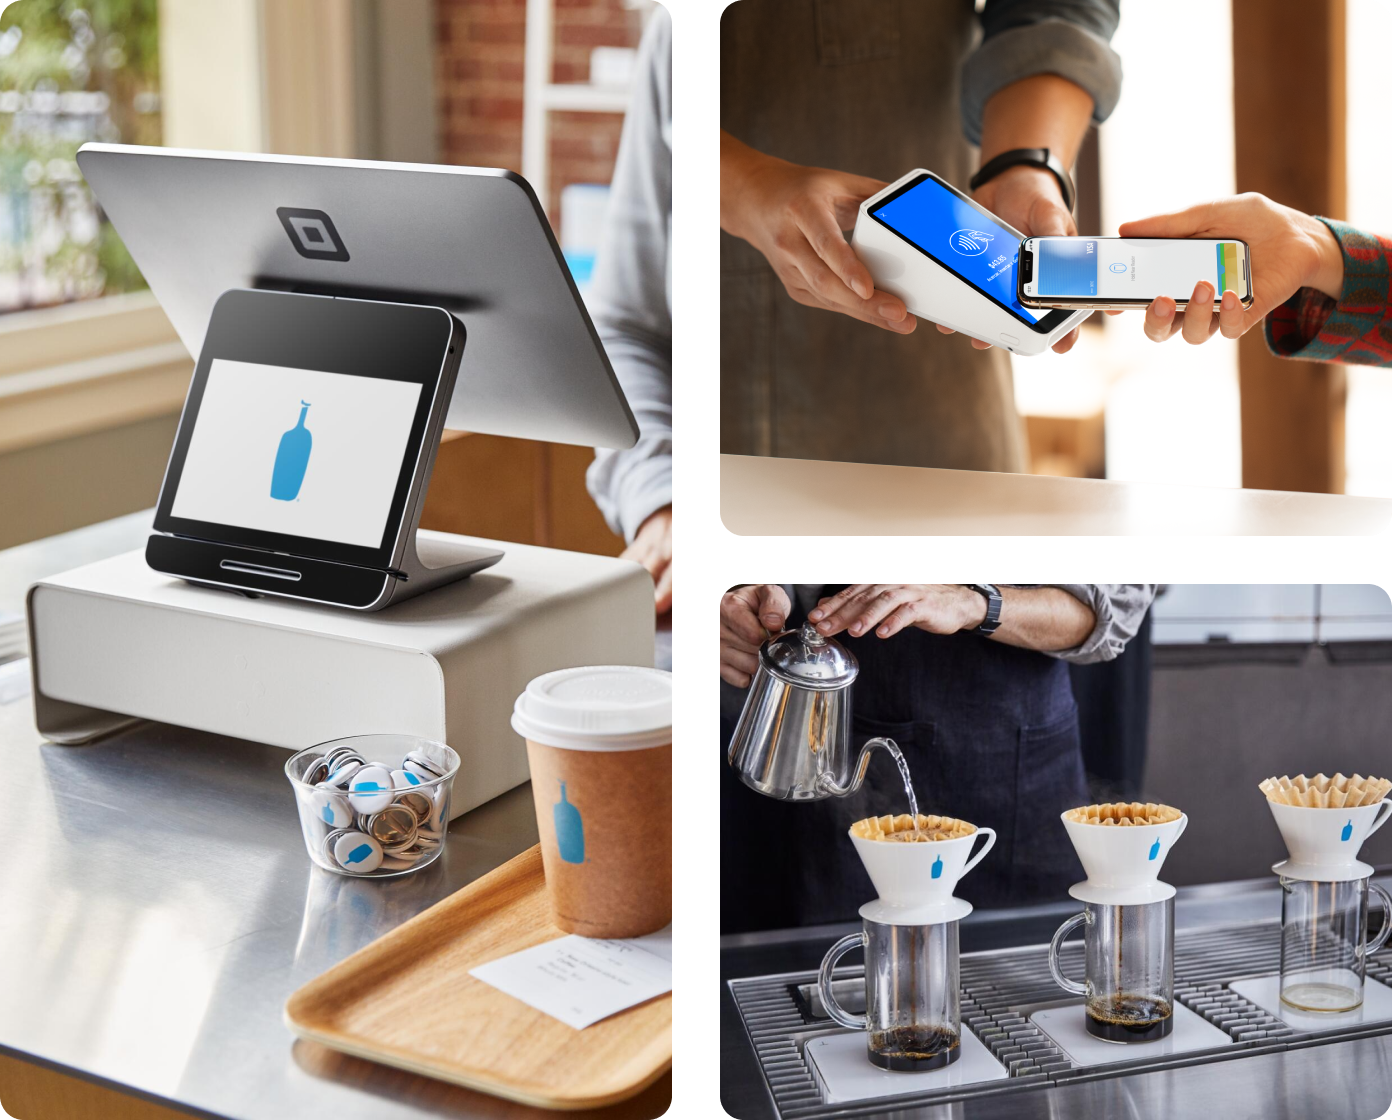 At Blue Bottle Coffee showing a Square Register, Square Terminal contactless phone payment, and a barista pouring coffee